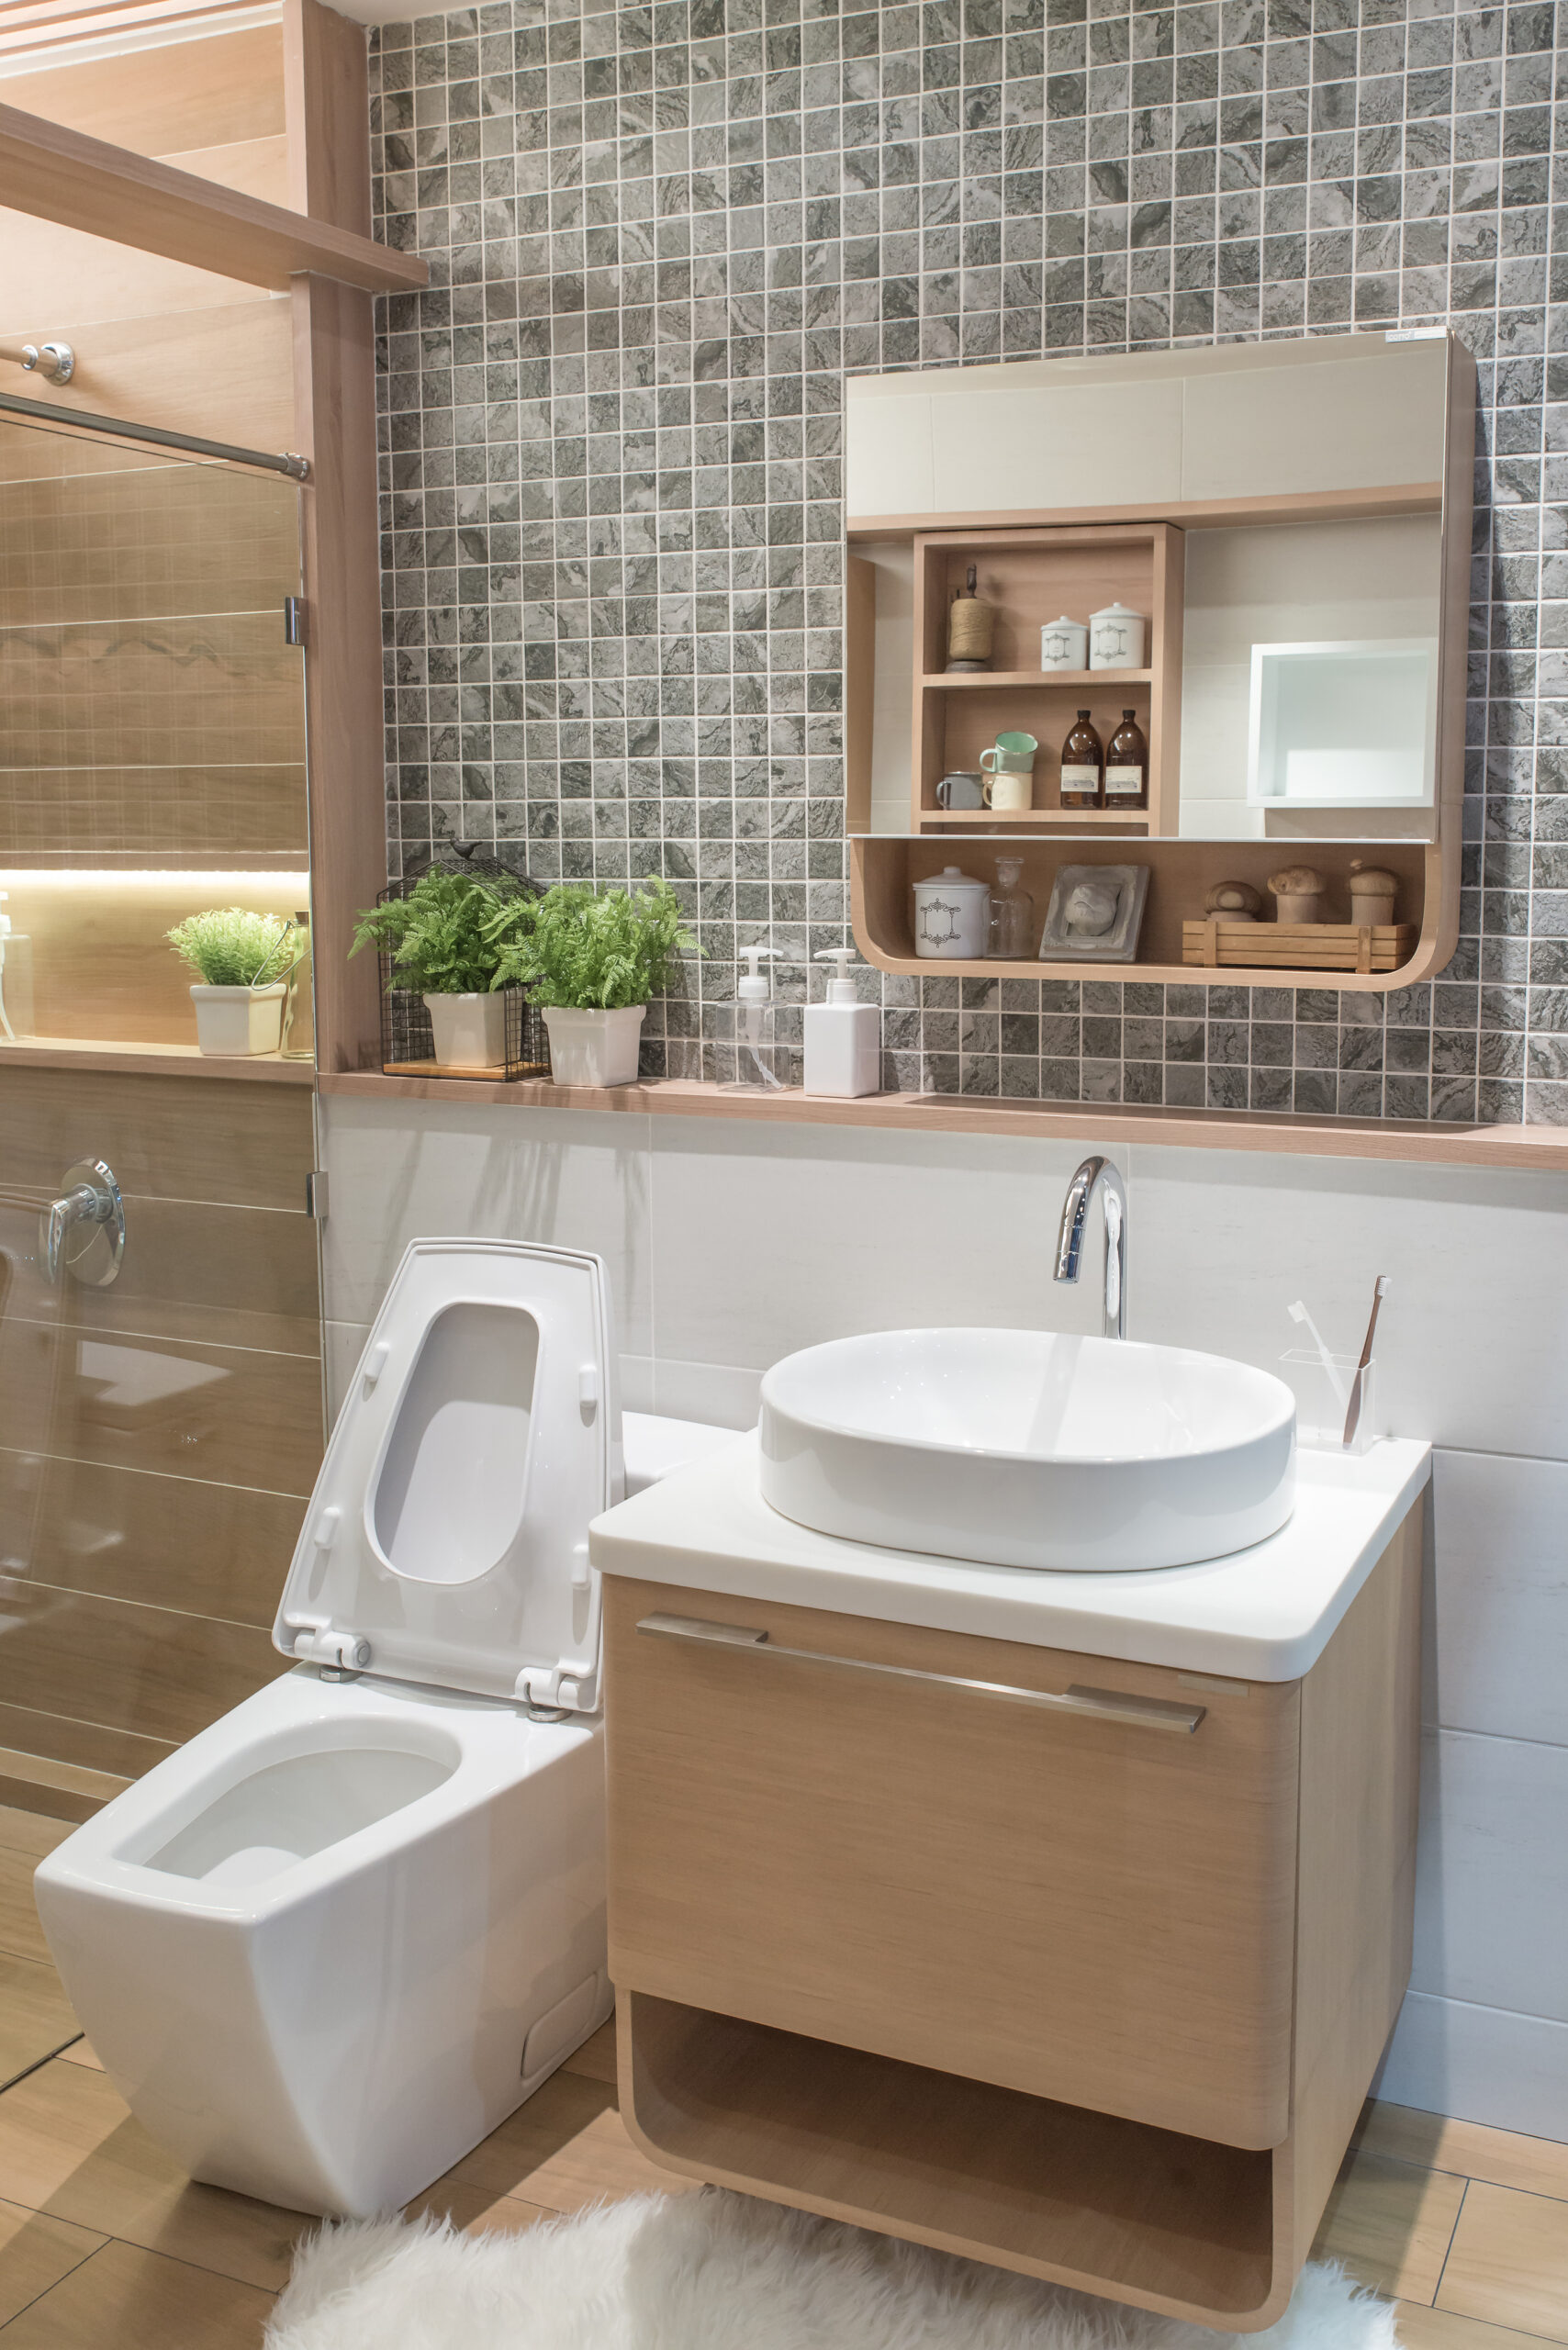 A wall-mounted sink with attached shelves offers both functionality and space-saving benefits in a small bathroom.